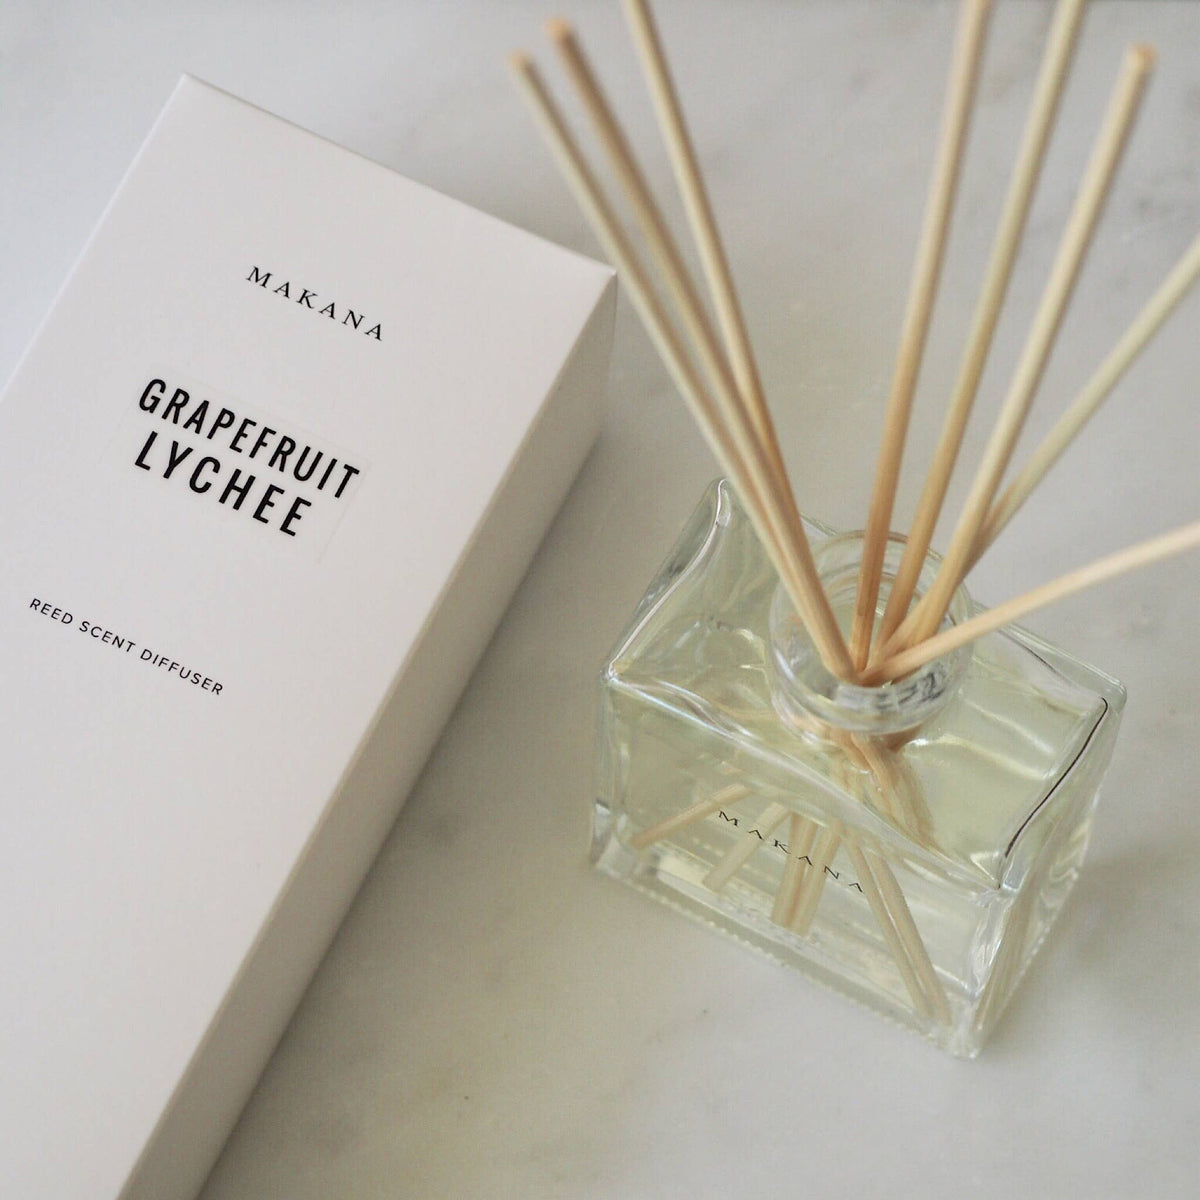 Grapefruit Lychee Reed Diffuser 4.8 oz